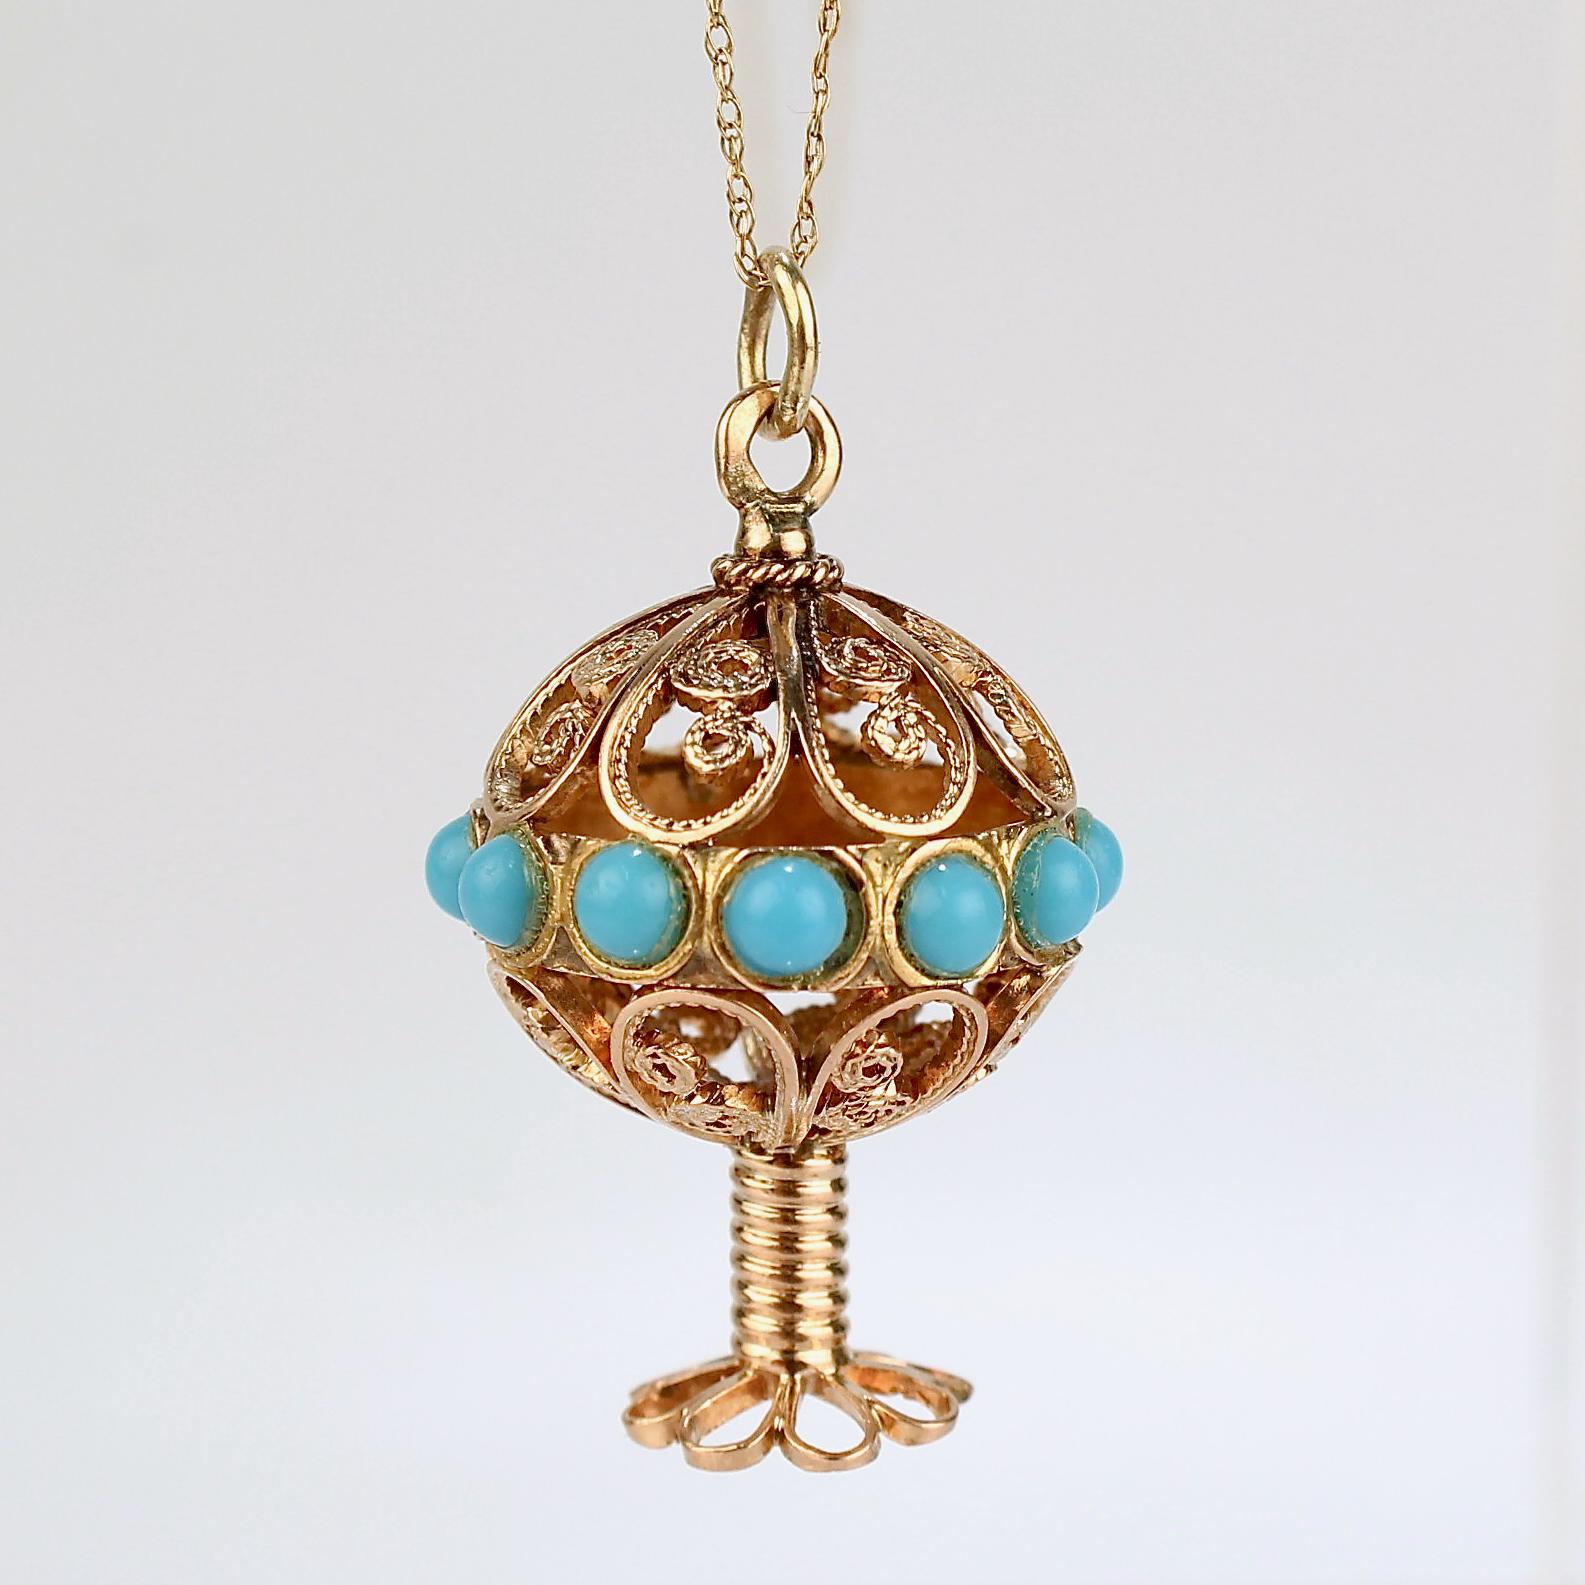 A very fine gold Etruscan Revival pendant charm.

In 18k yellow gold.

In the form of a hollow sphere with filigree flower petal sections and smooth round turquoise cabochons set around a center sphere that is supported by a gold coil pedestal and